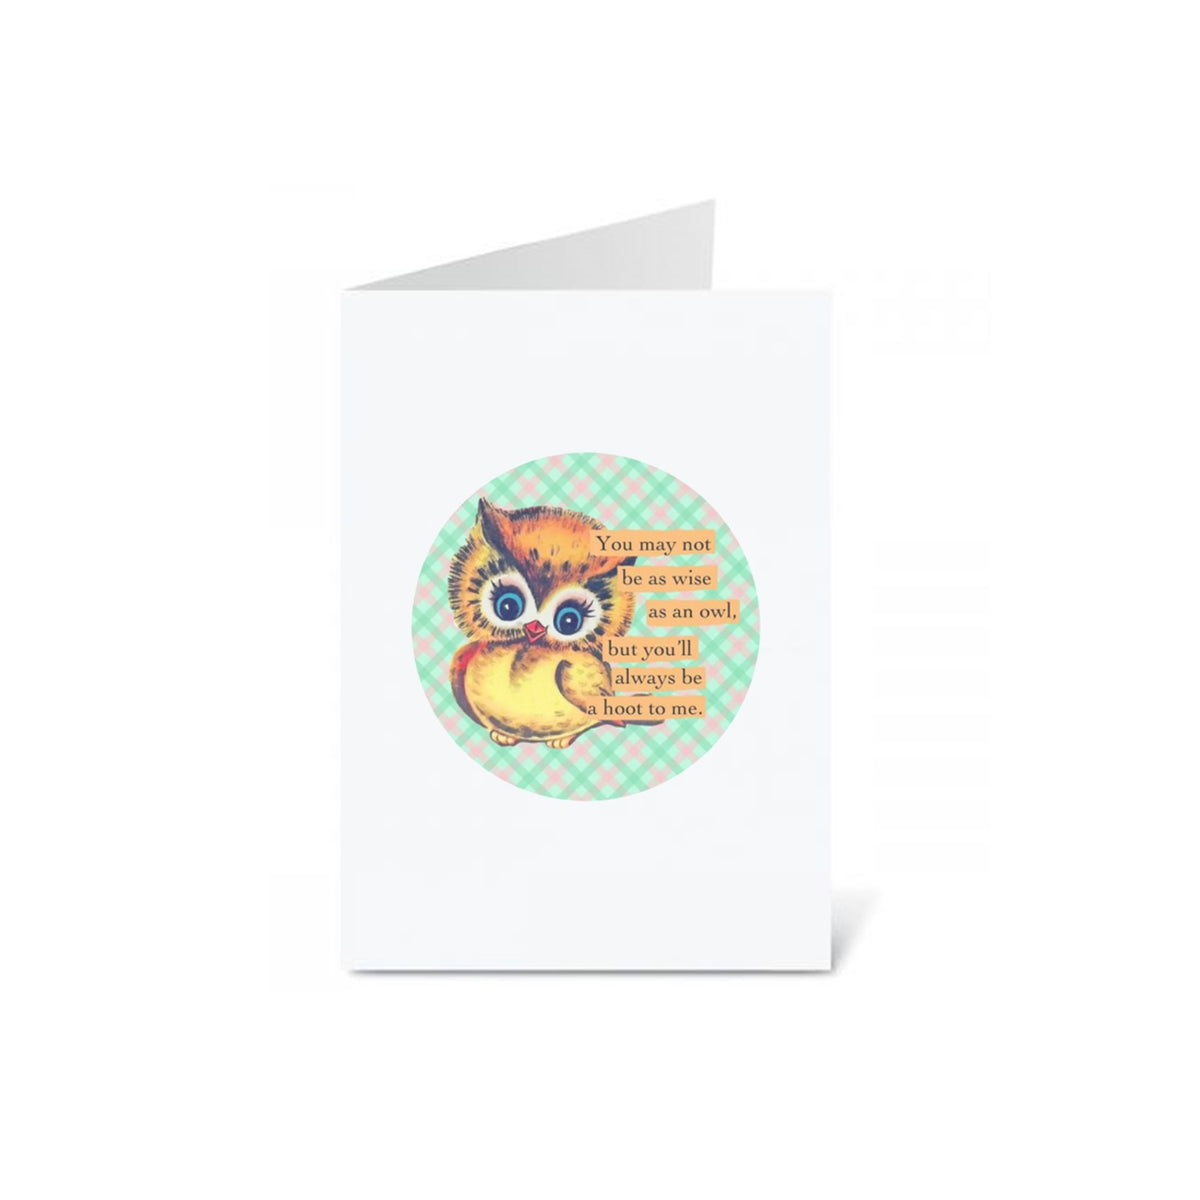 Dodgy Greeting Cards - Hoot